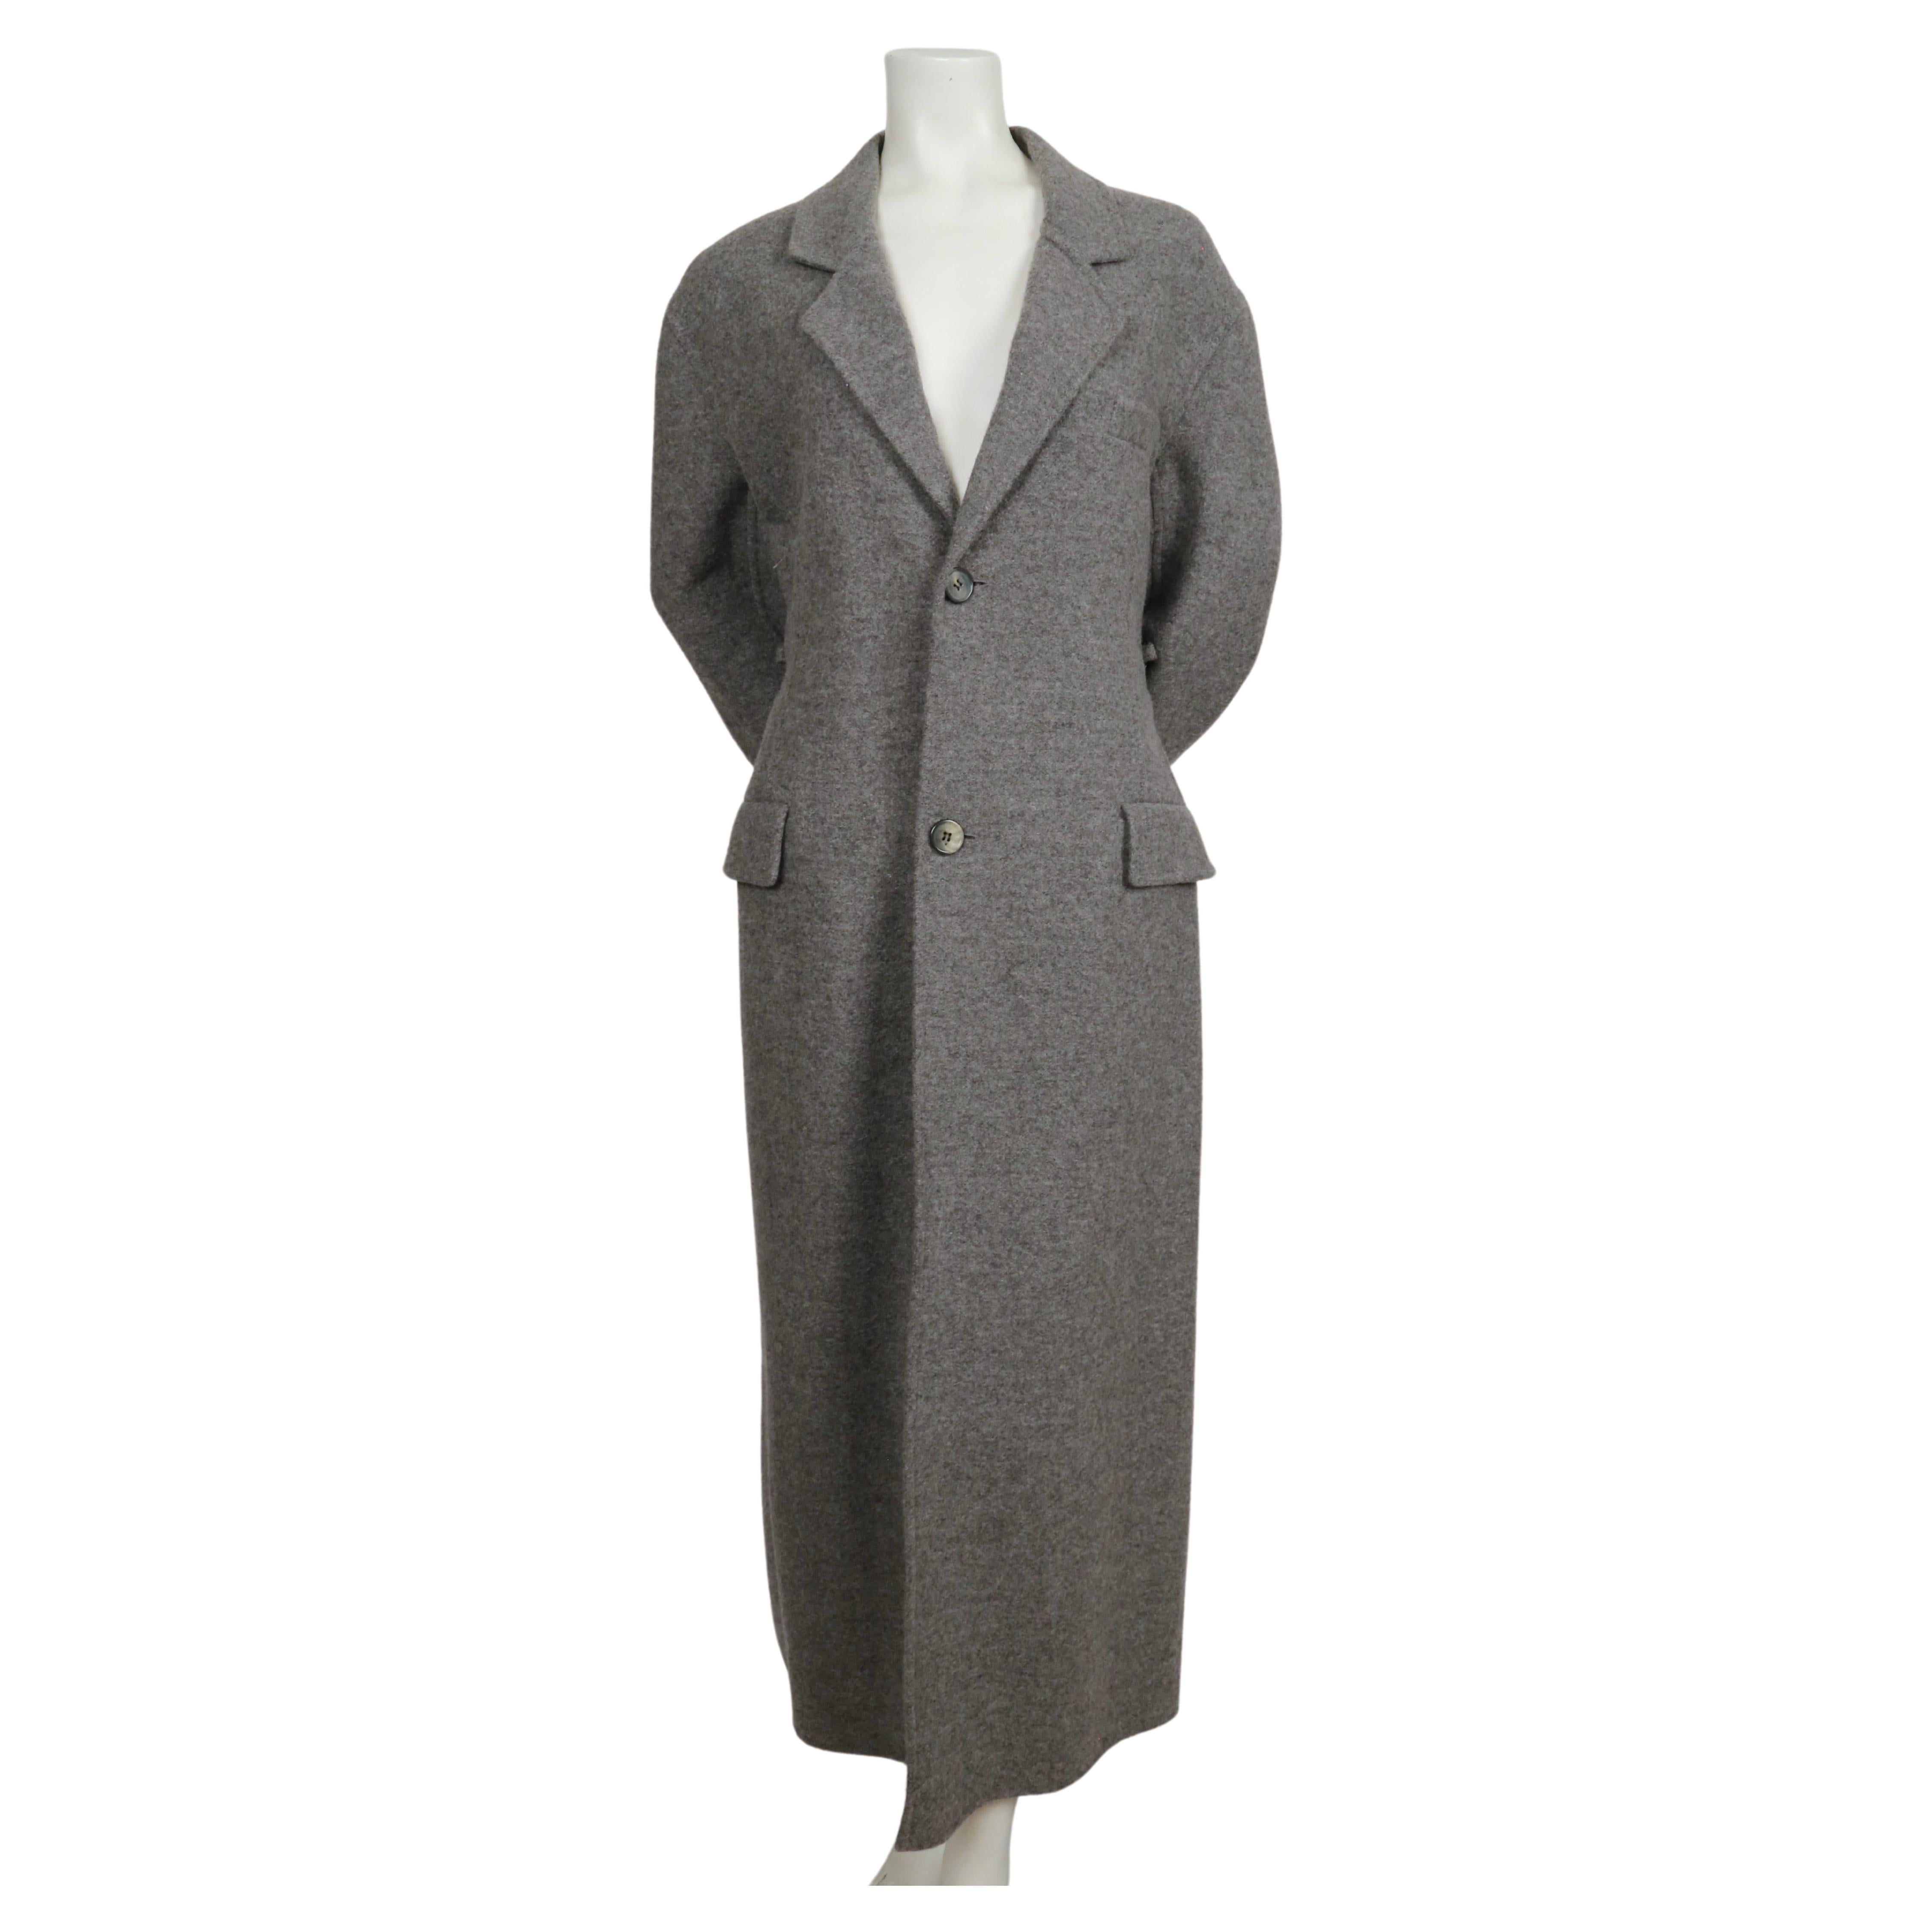 Full length, heathered-grey, fuzzy wool coat with extra long half belt designed by Phoebe Philo for Celine dating to fall of 2018 collection.  French size 36. Approximate measurements: dropped shoulder 21